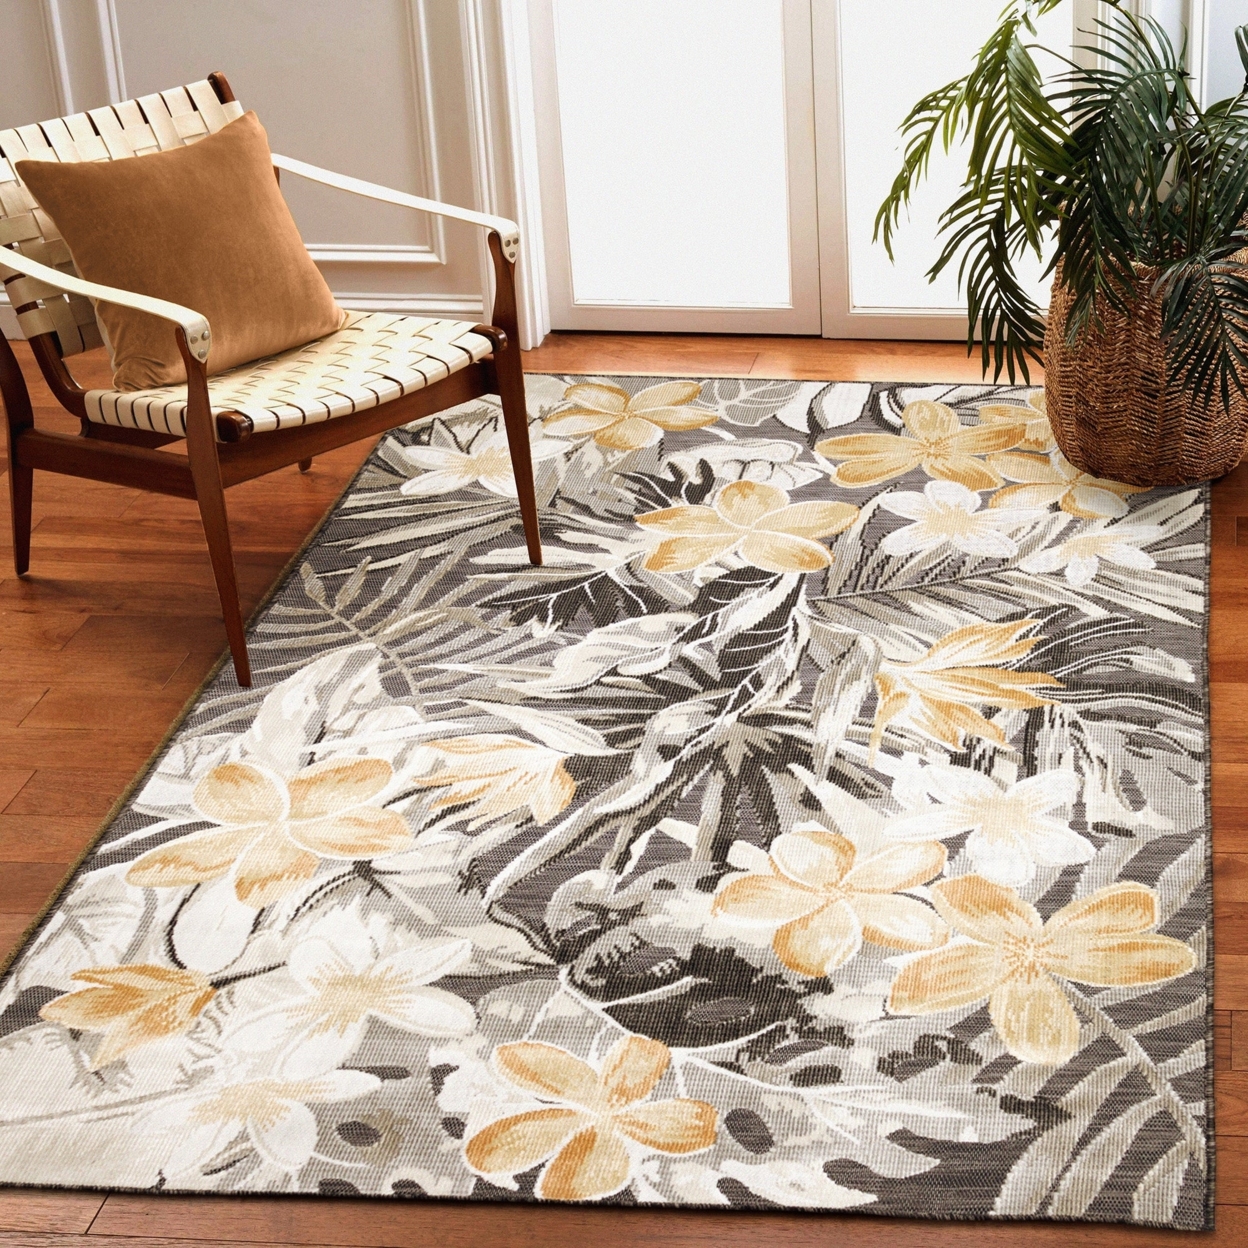 Liora Manne Canyon Paradise Indoor Outdoor Area Rug Charcoal - 7'8 X 9'10